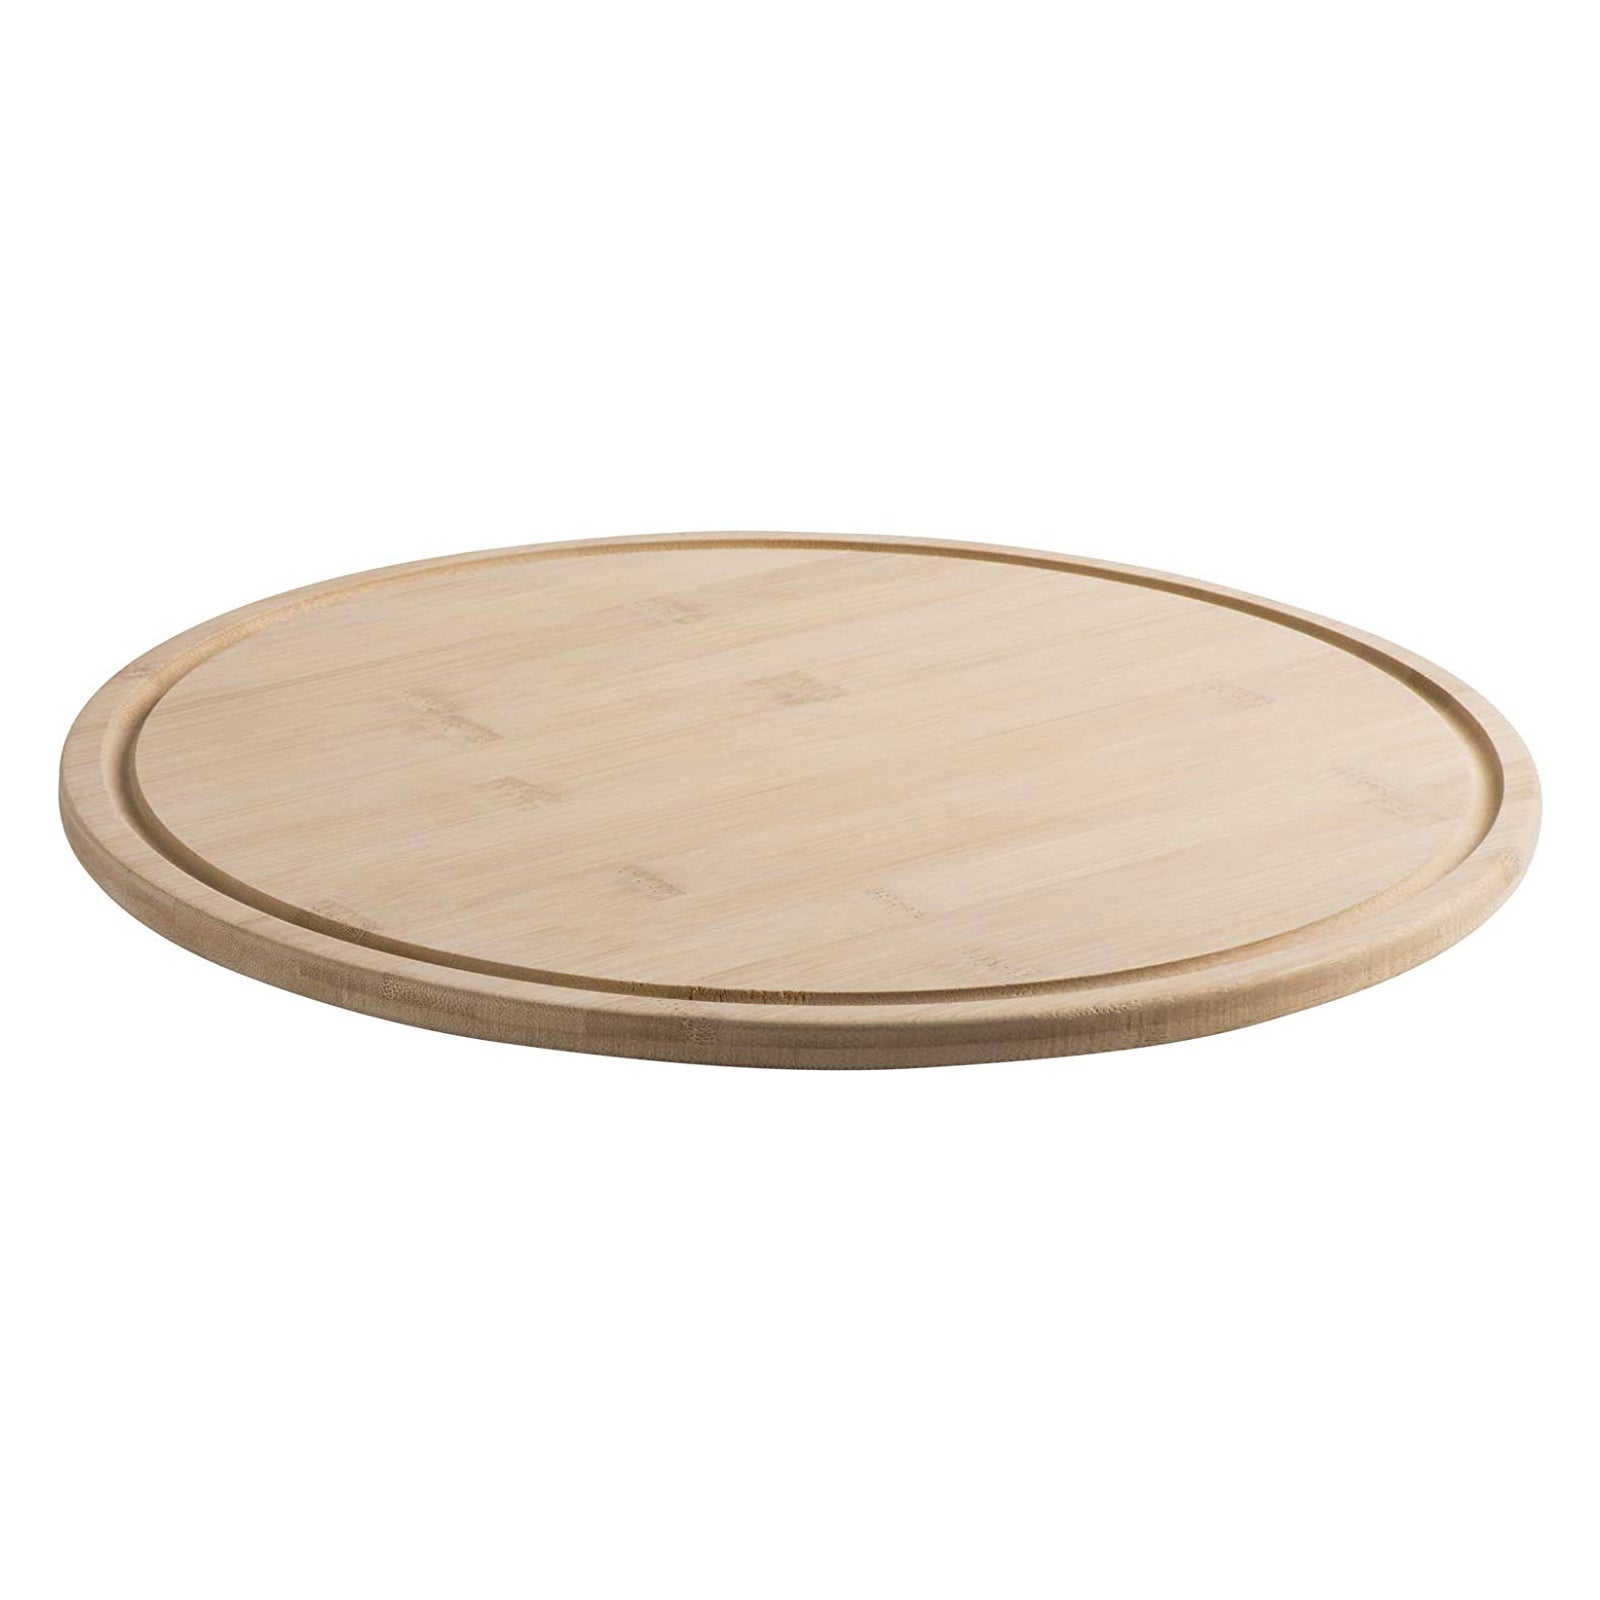 Small Chopping Board Wooden Boards Bamboo Picnic Platter